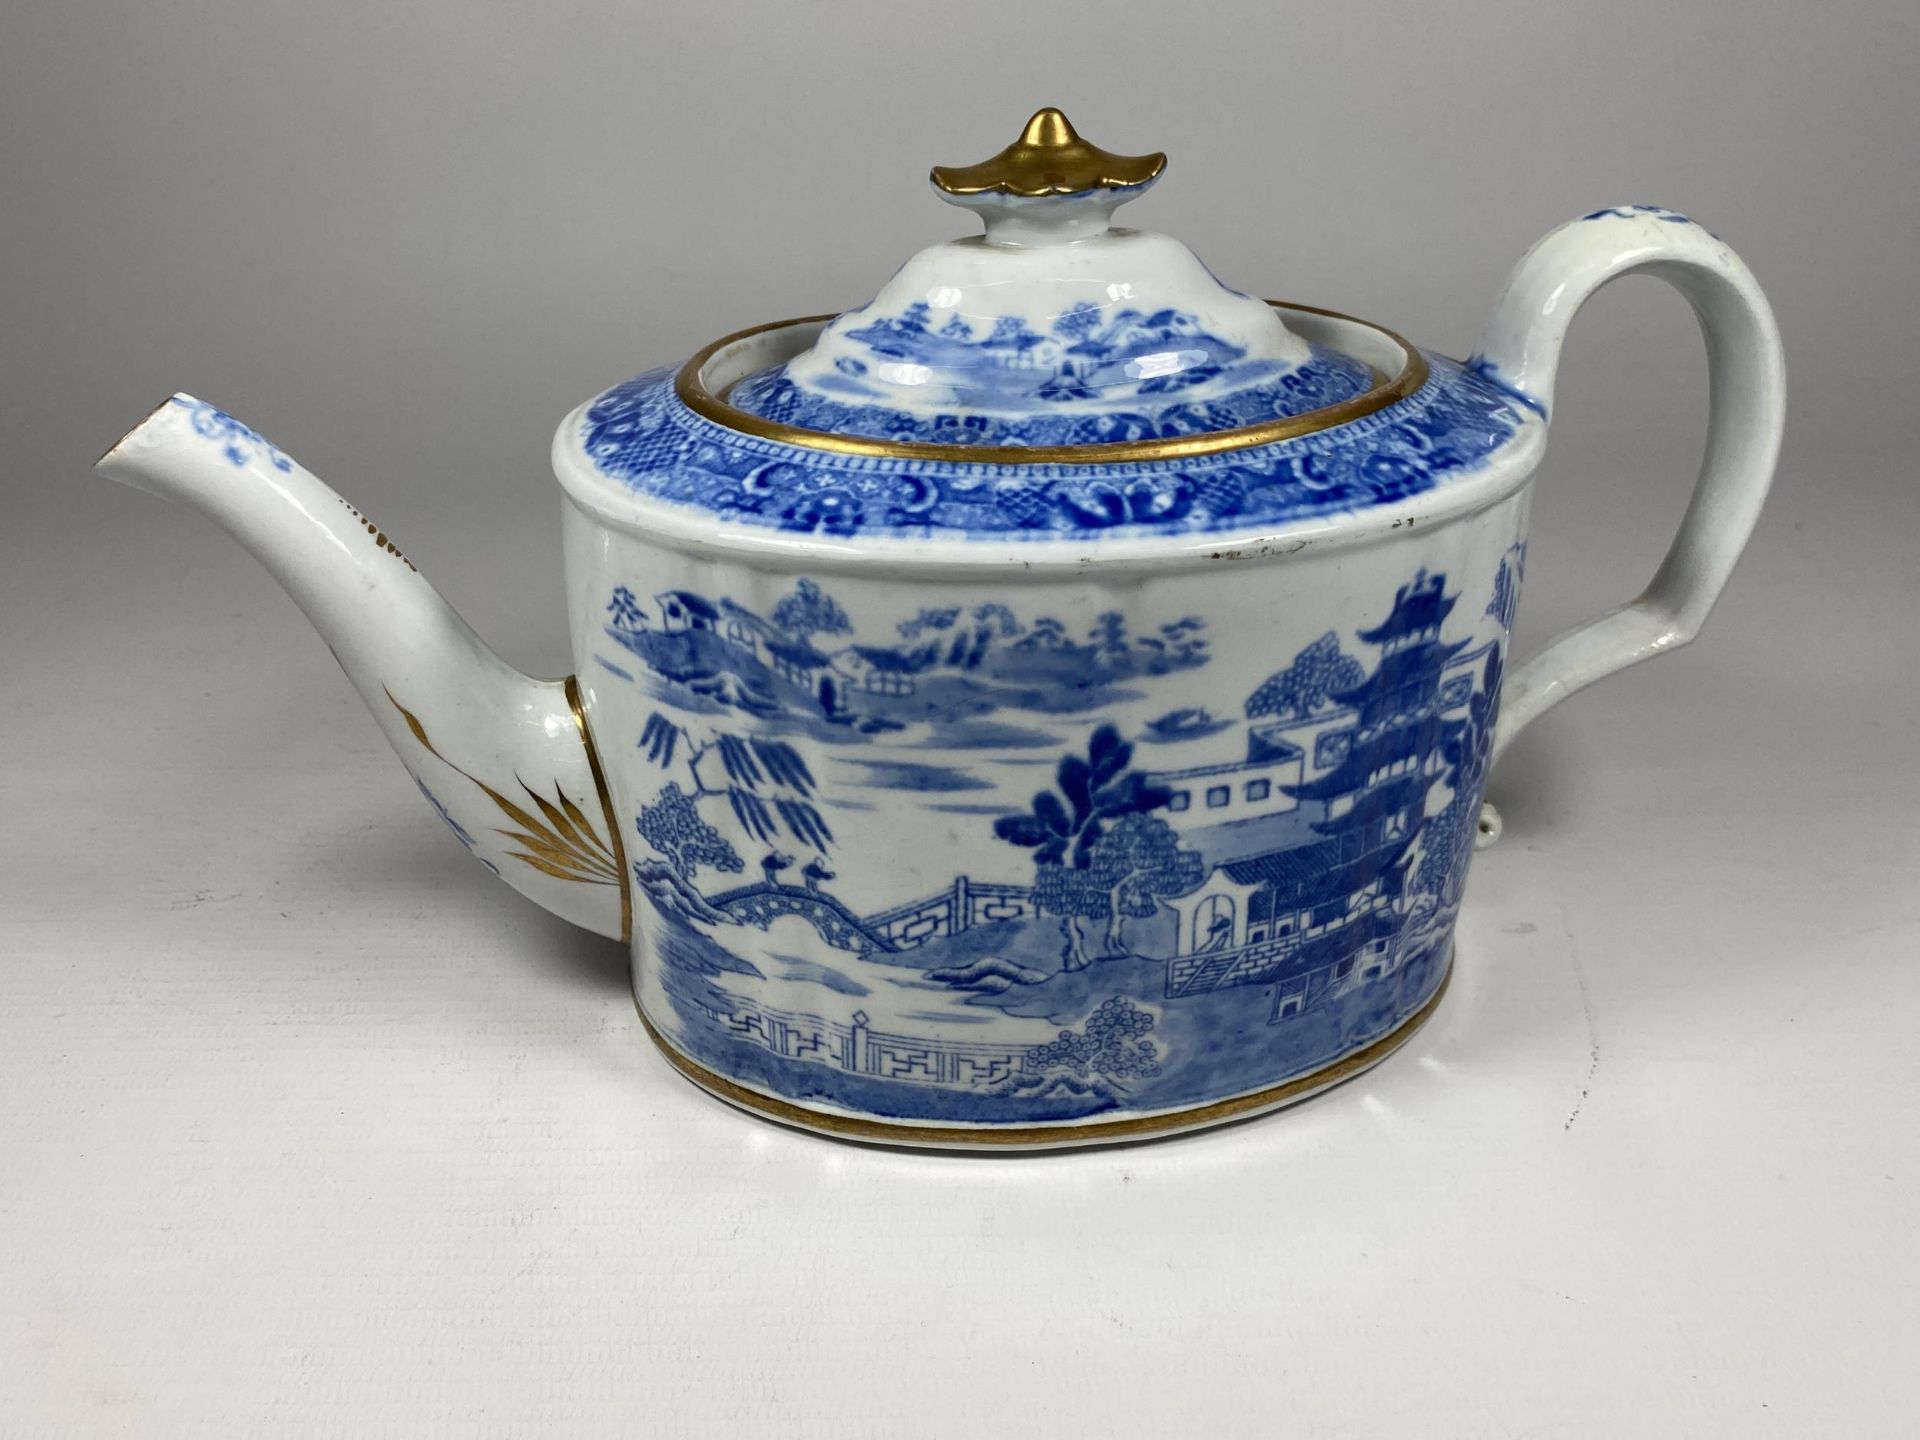 A CHINESE QING BLUE & WHITE EXPORT PORCELAIN TEAPOT WITH PAGODA DESIGN, HEIGHT 15CM - Image 4 of 6